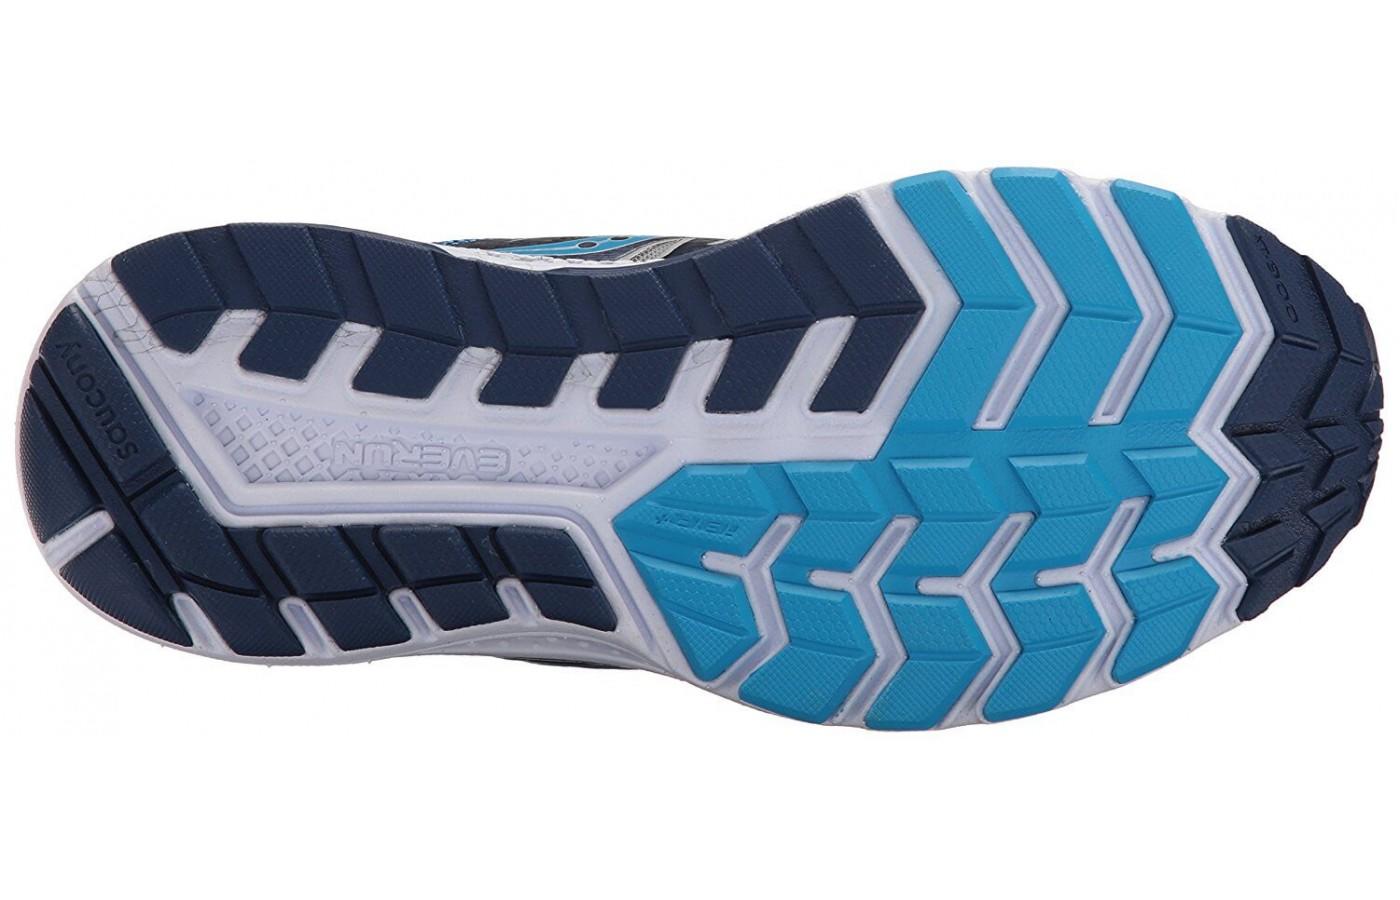 The TRI-FLEX outsole adds traction and flexibility 